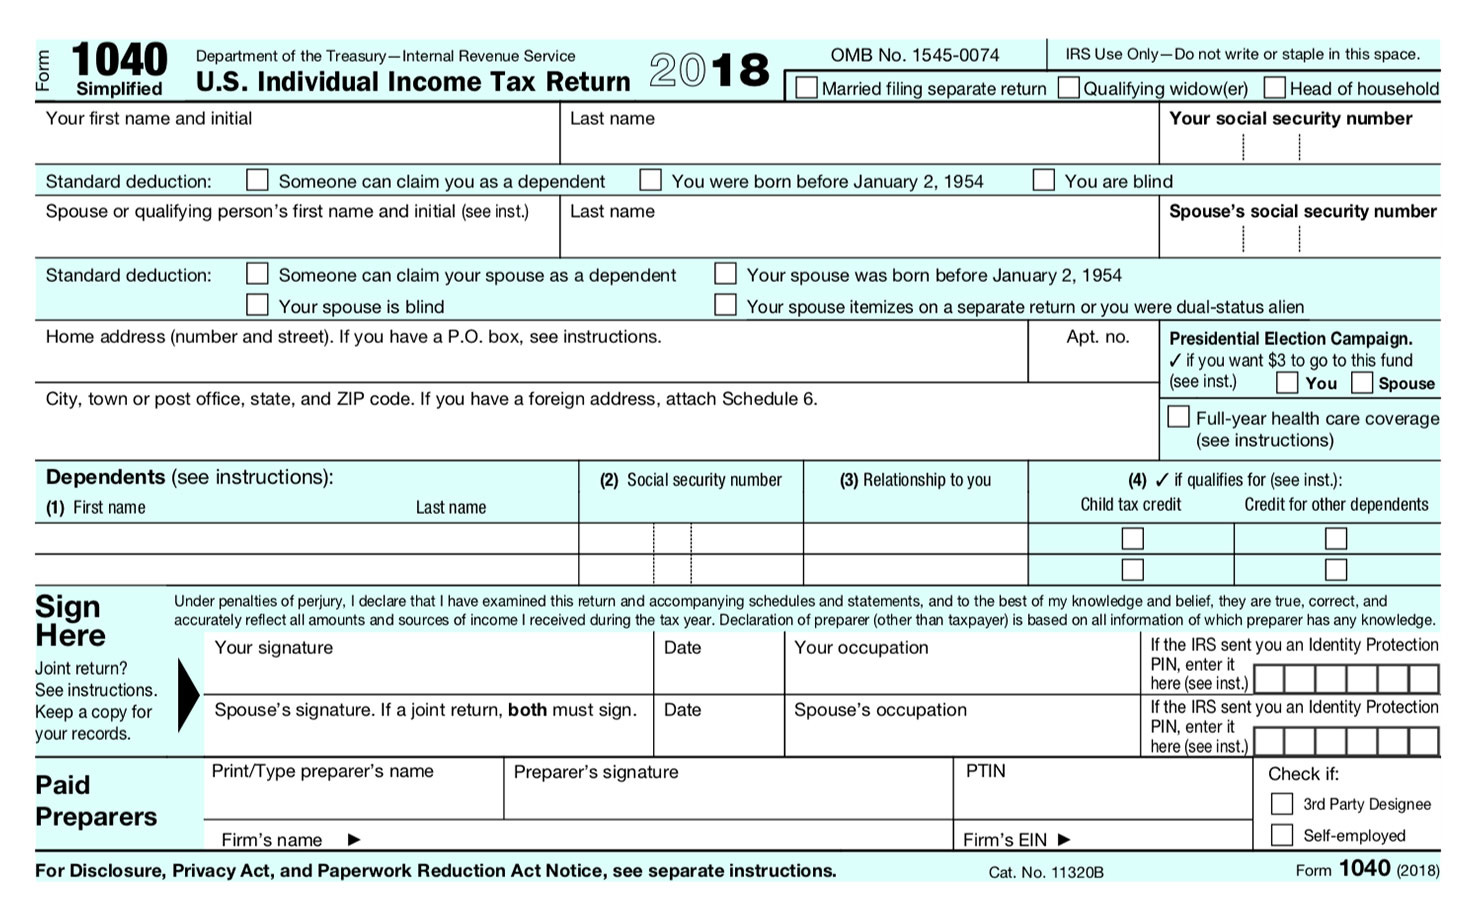 The new IRS tax forms are out Here’s what you should know